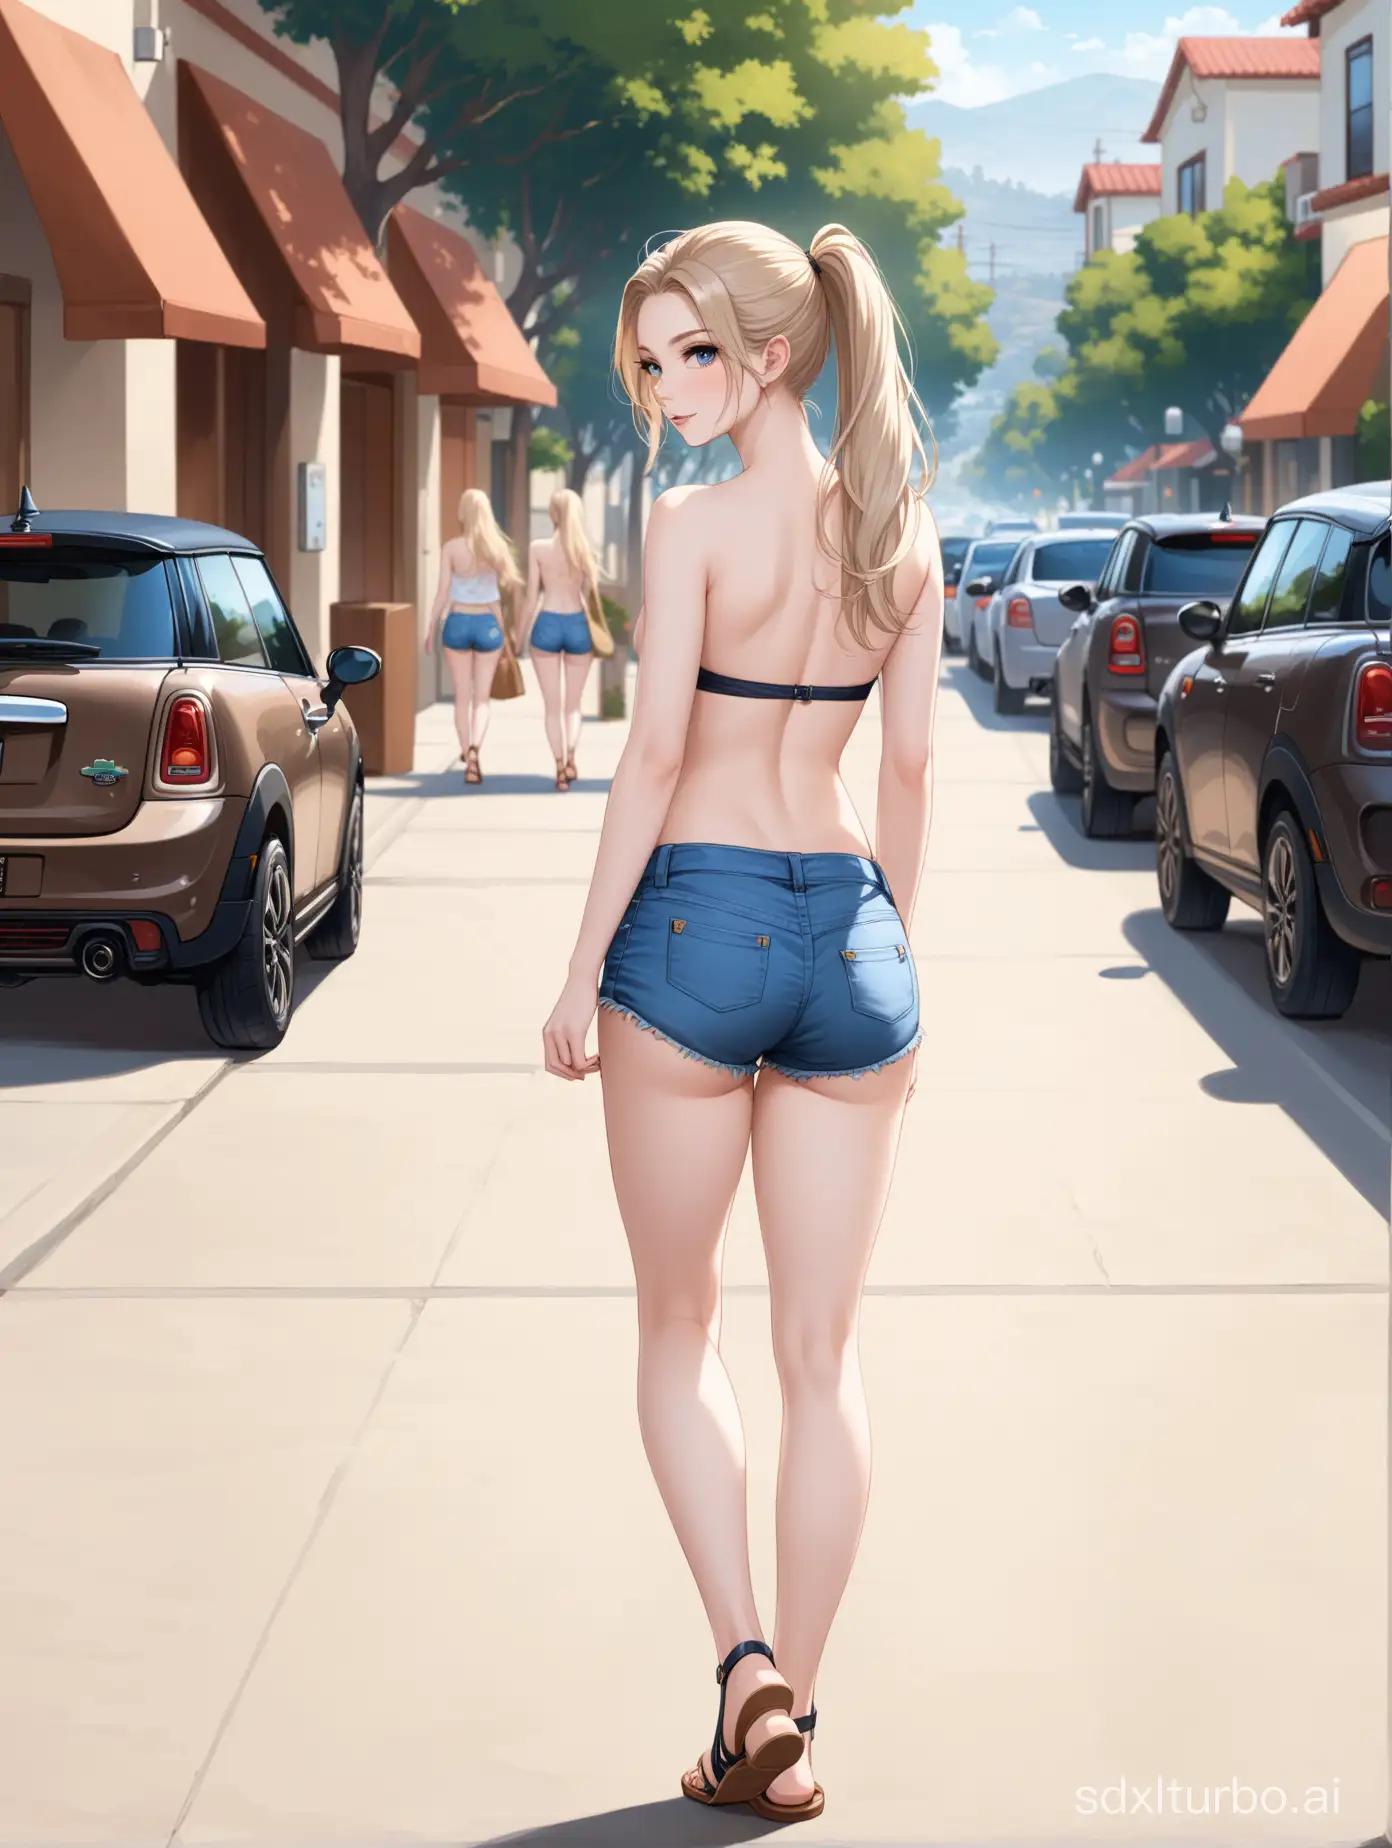 topless elegant girl, in the street, perfect ass, pale skin, sandals, blue mini jeans shorts, ash blonde pony tail, summer, California, cleavage, slim waist, tall